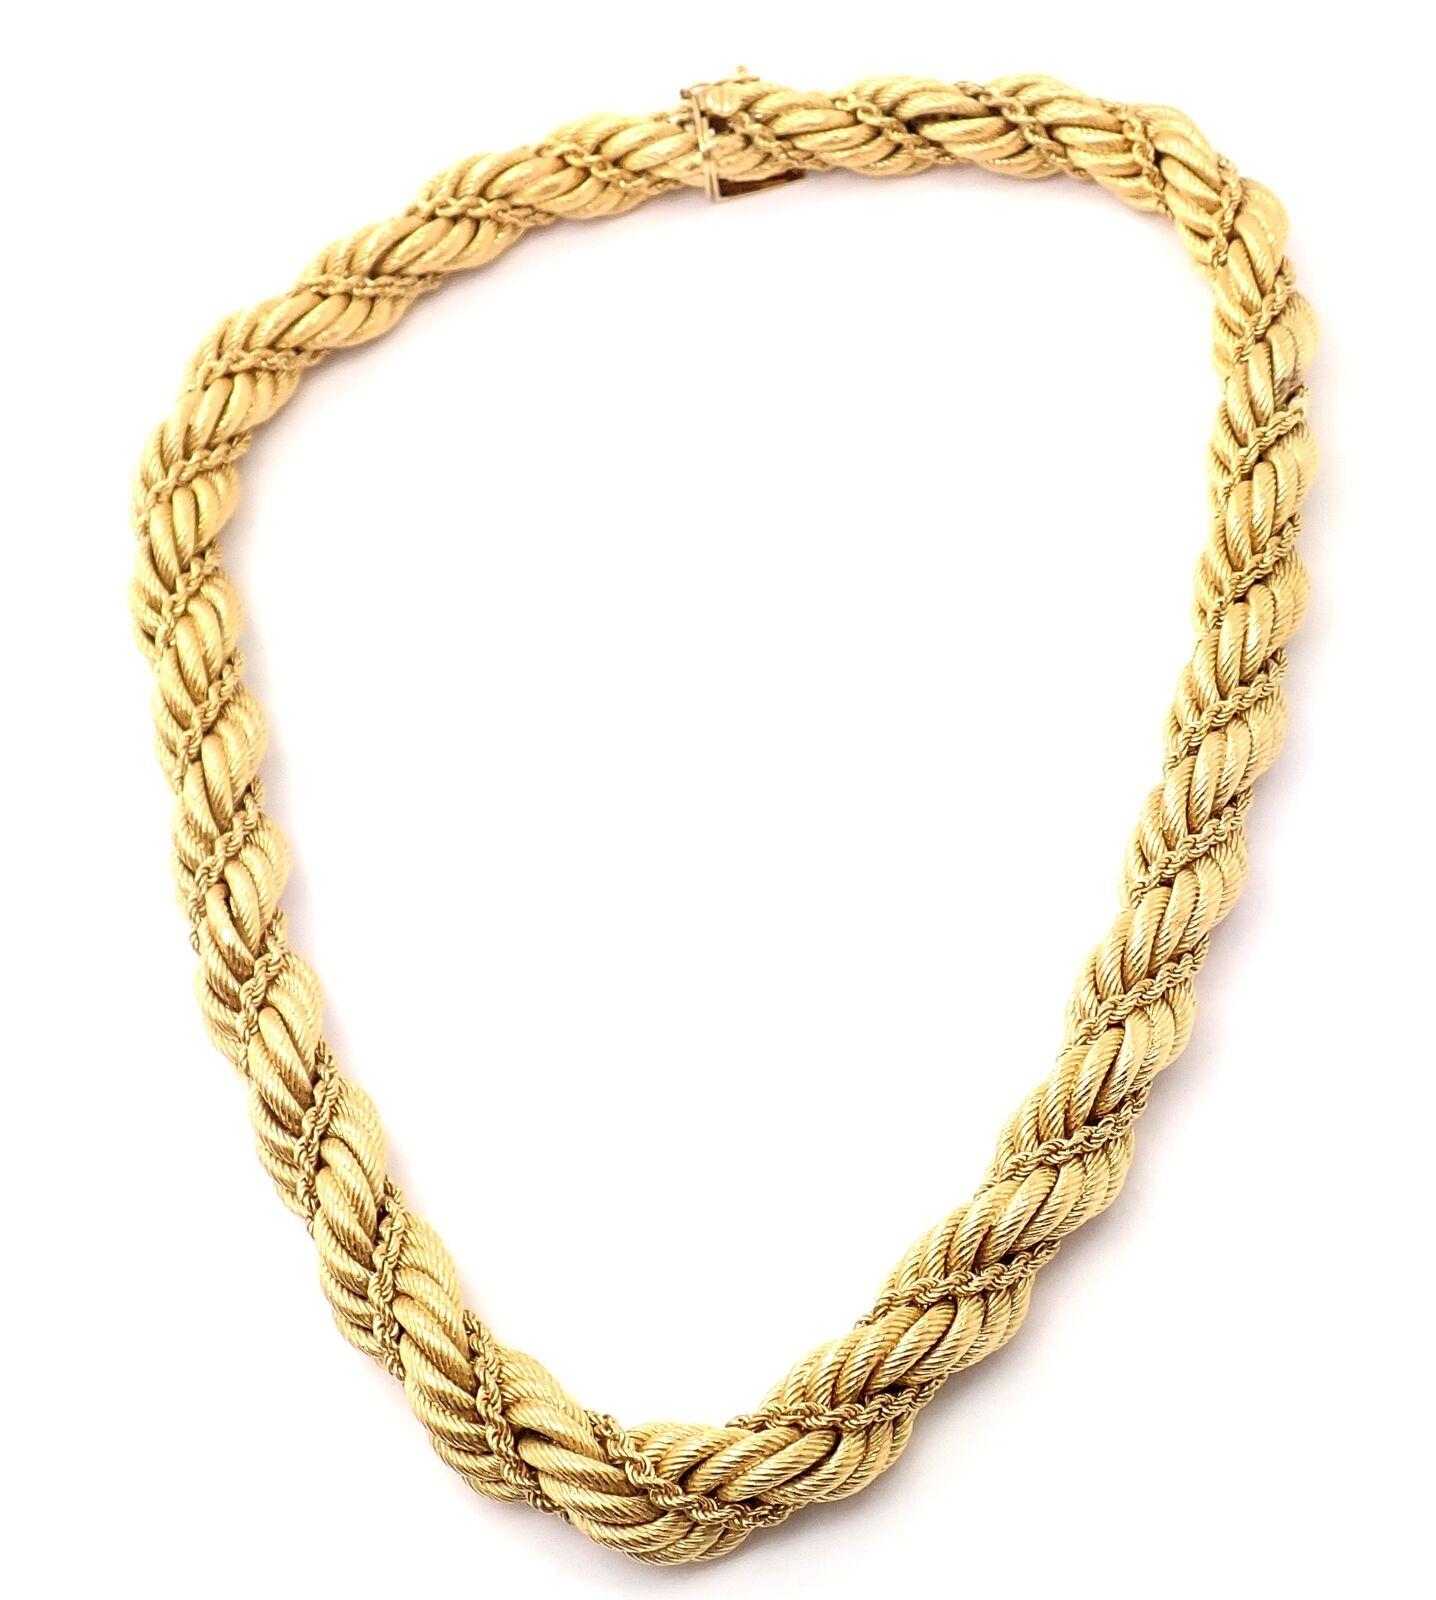 18k Yellow Gold Vintage Twisted Double Rope Chain Necklace by Tiffany Co.
Details: 
Length: 16.25